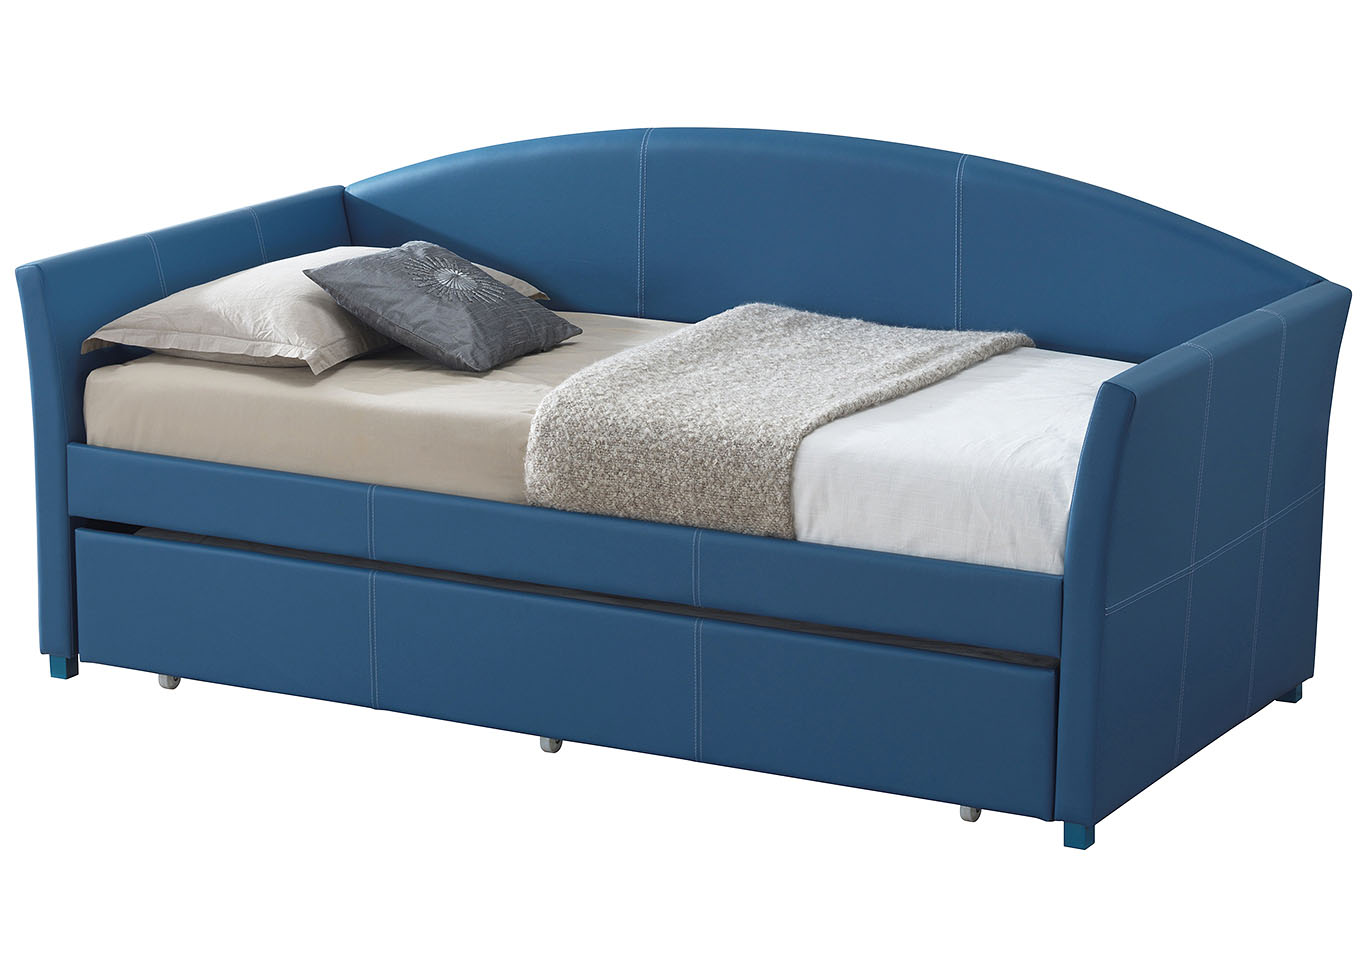 Blue Day Bed,Glory Furniture